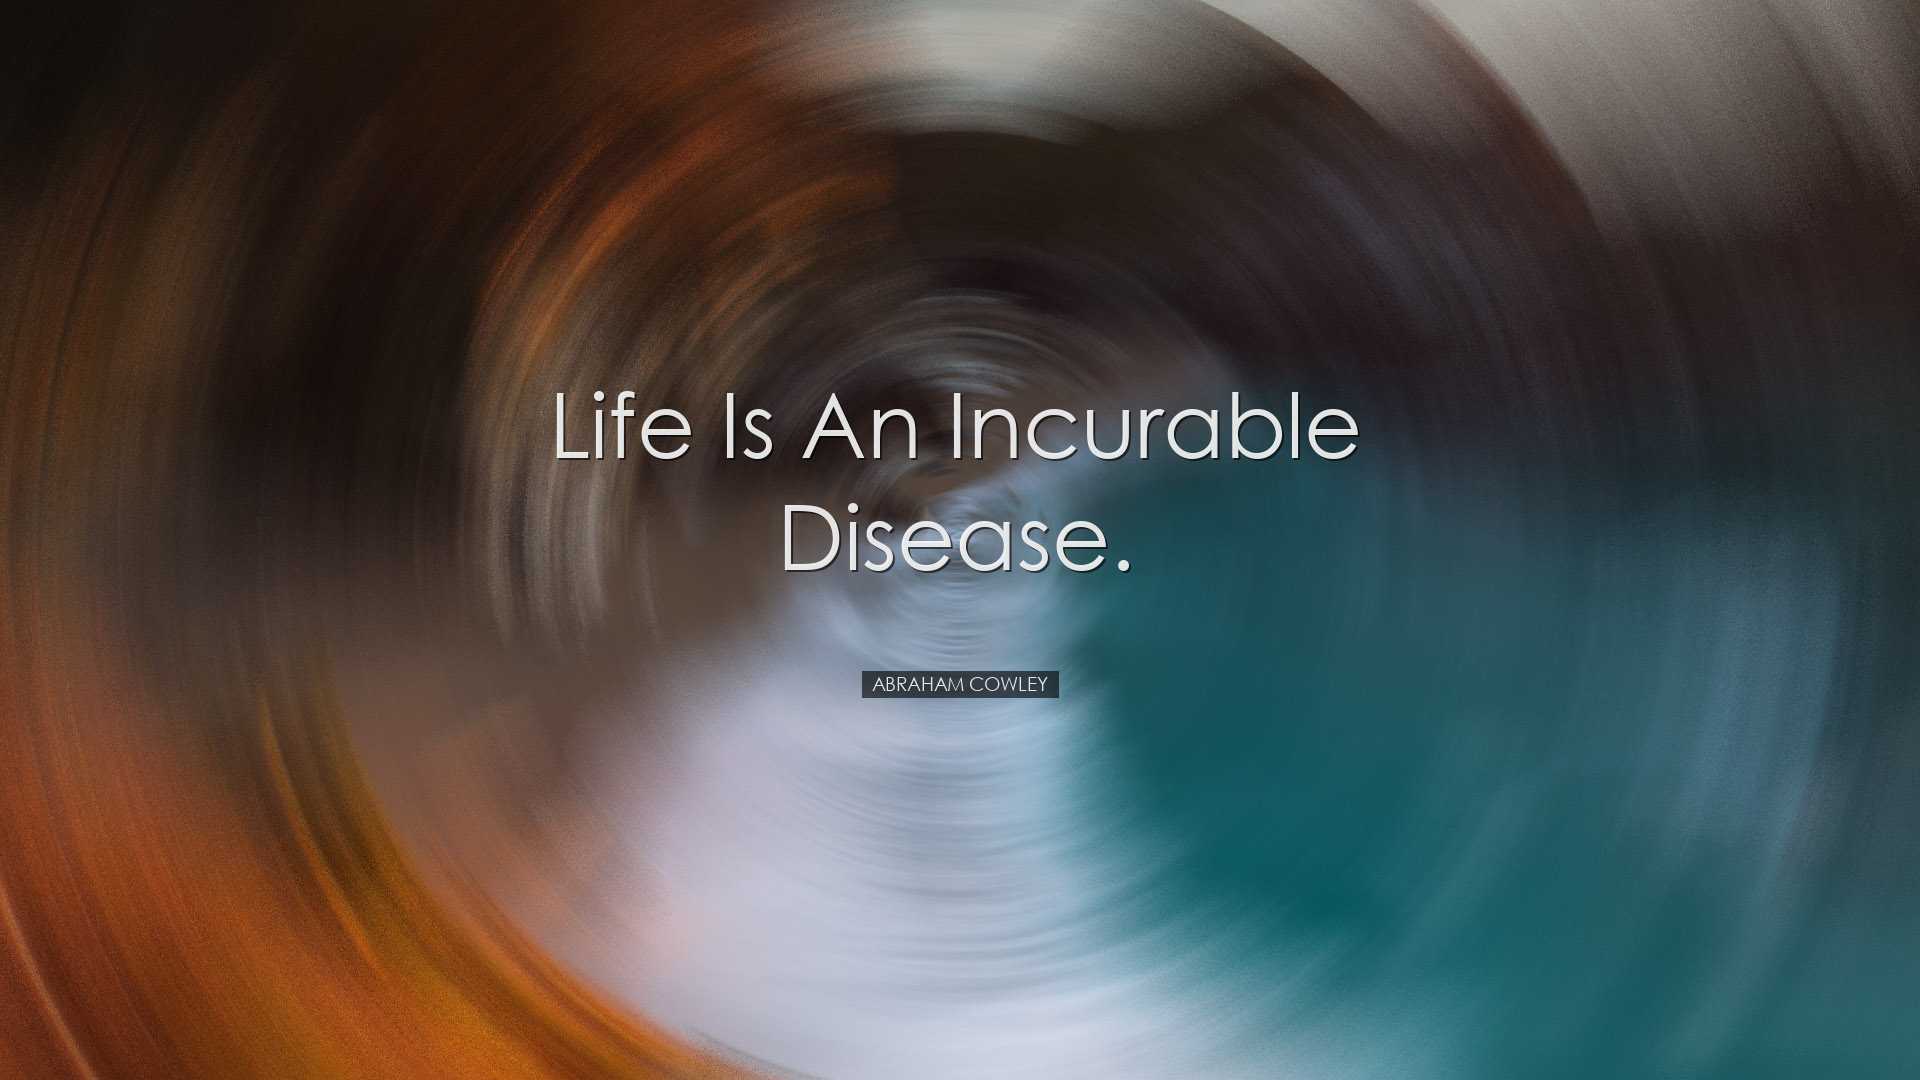 Life is an incurable Disease. - Abraham Cowley